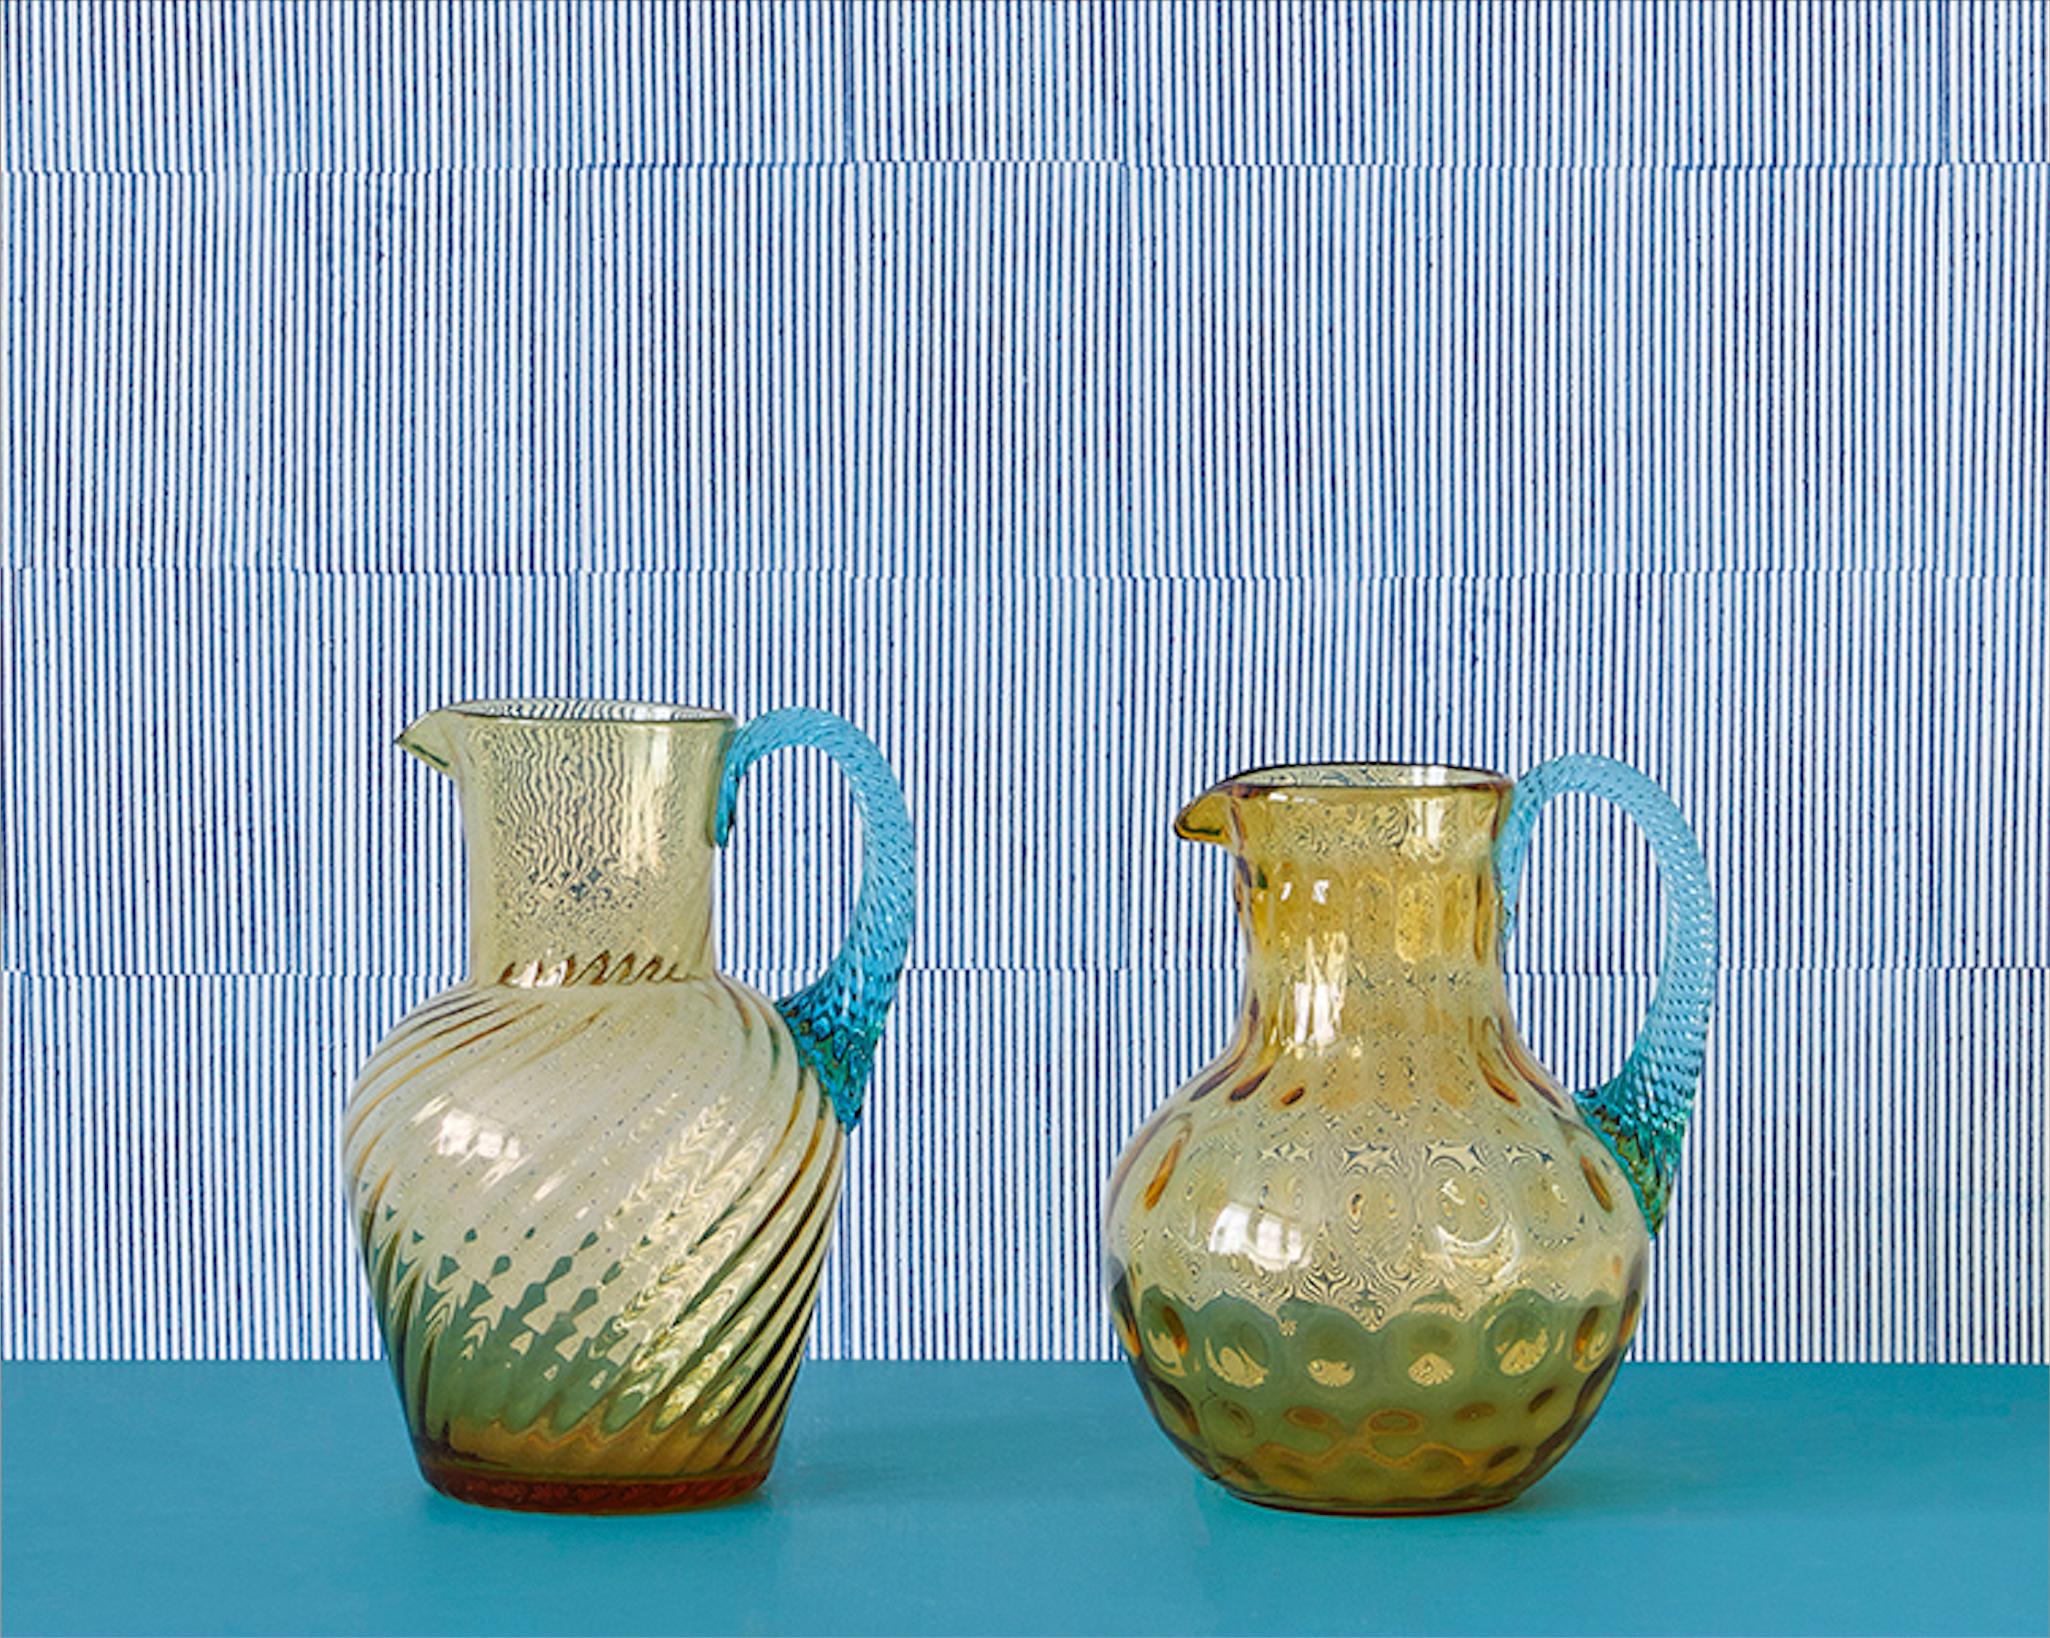 Vintage, France
Early 20th century

A pair of glass pitchers in amber and turquoise glass.

H 21 x Ø 16 cm